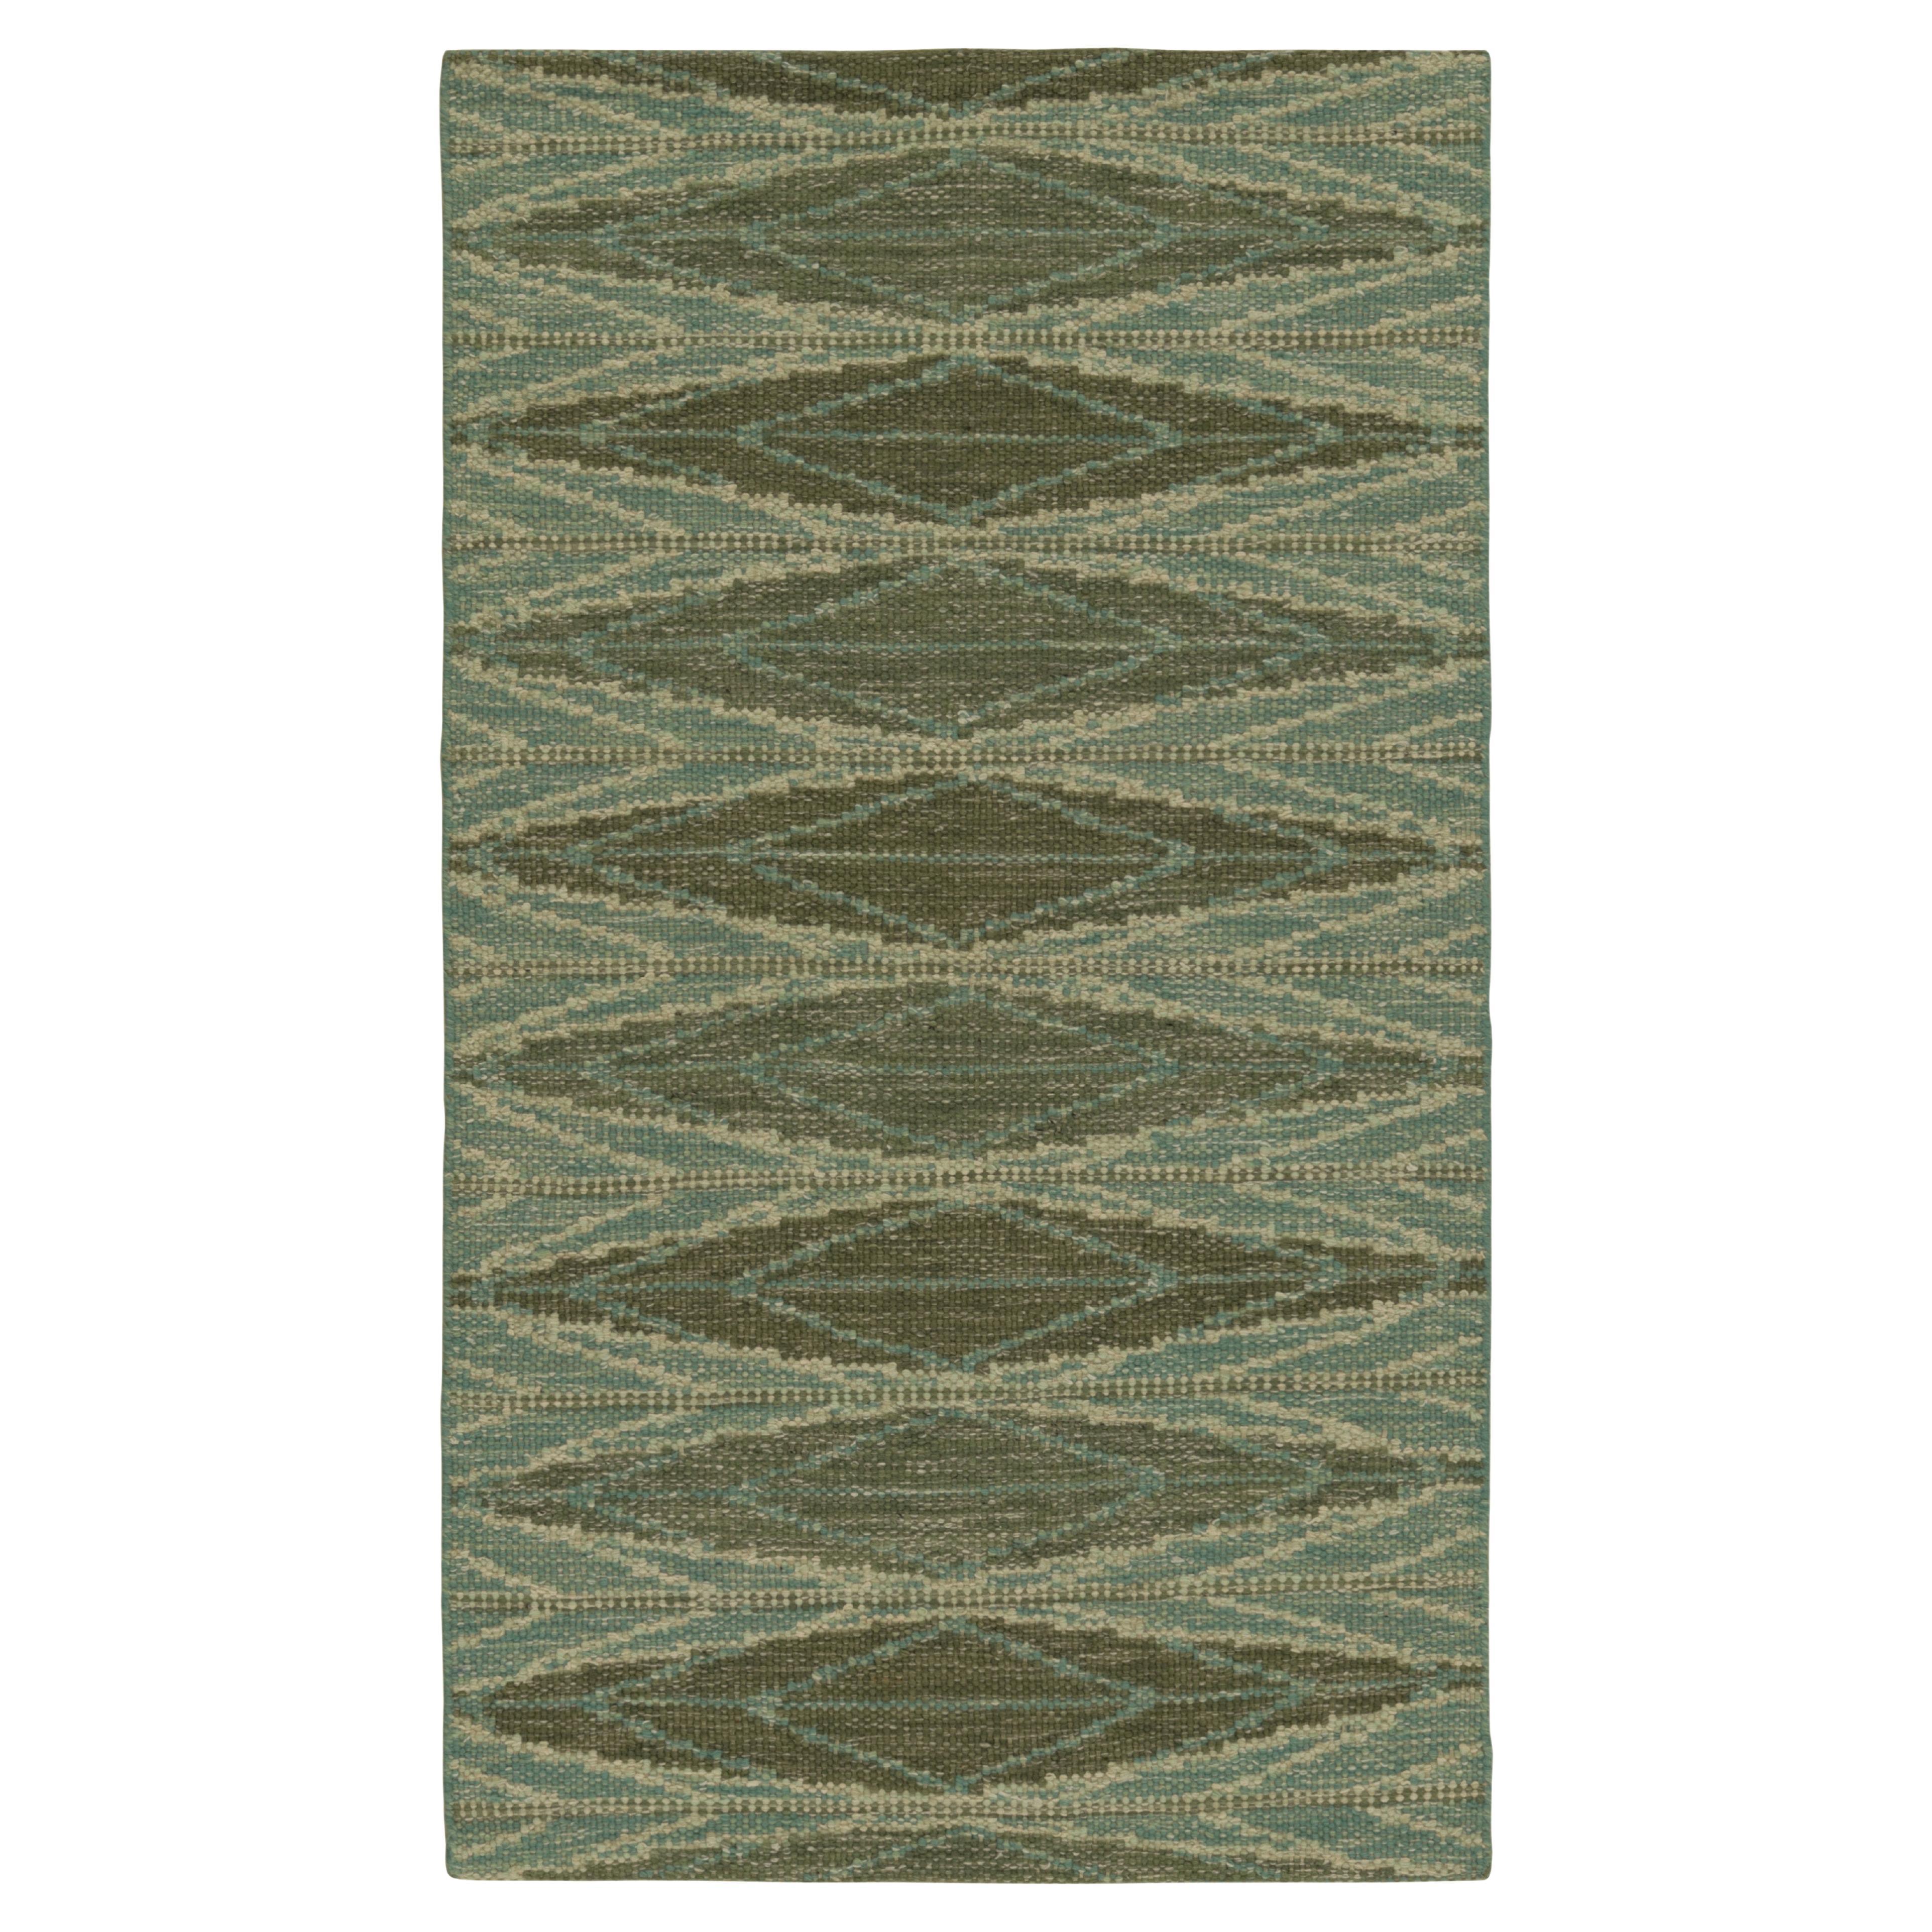 Rug & Kilim’s Scandinavian Style Rug in Green and Blue, with Geometric Patterns